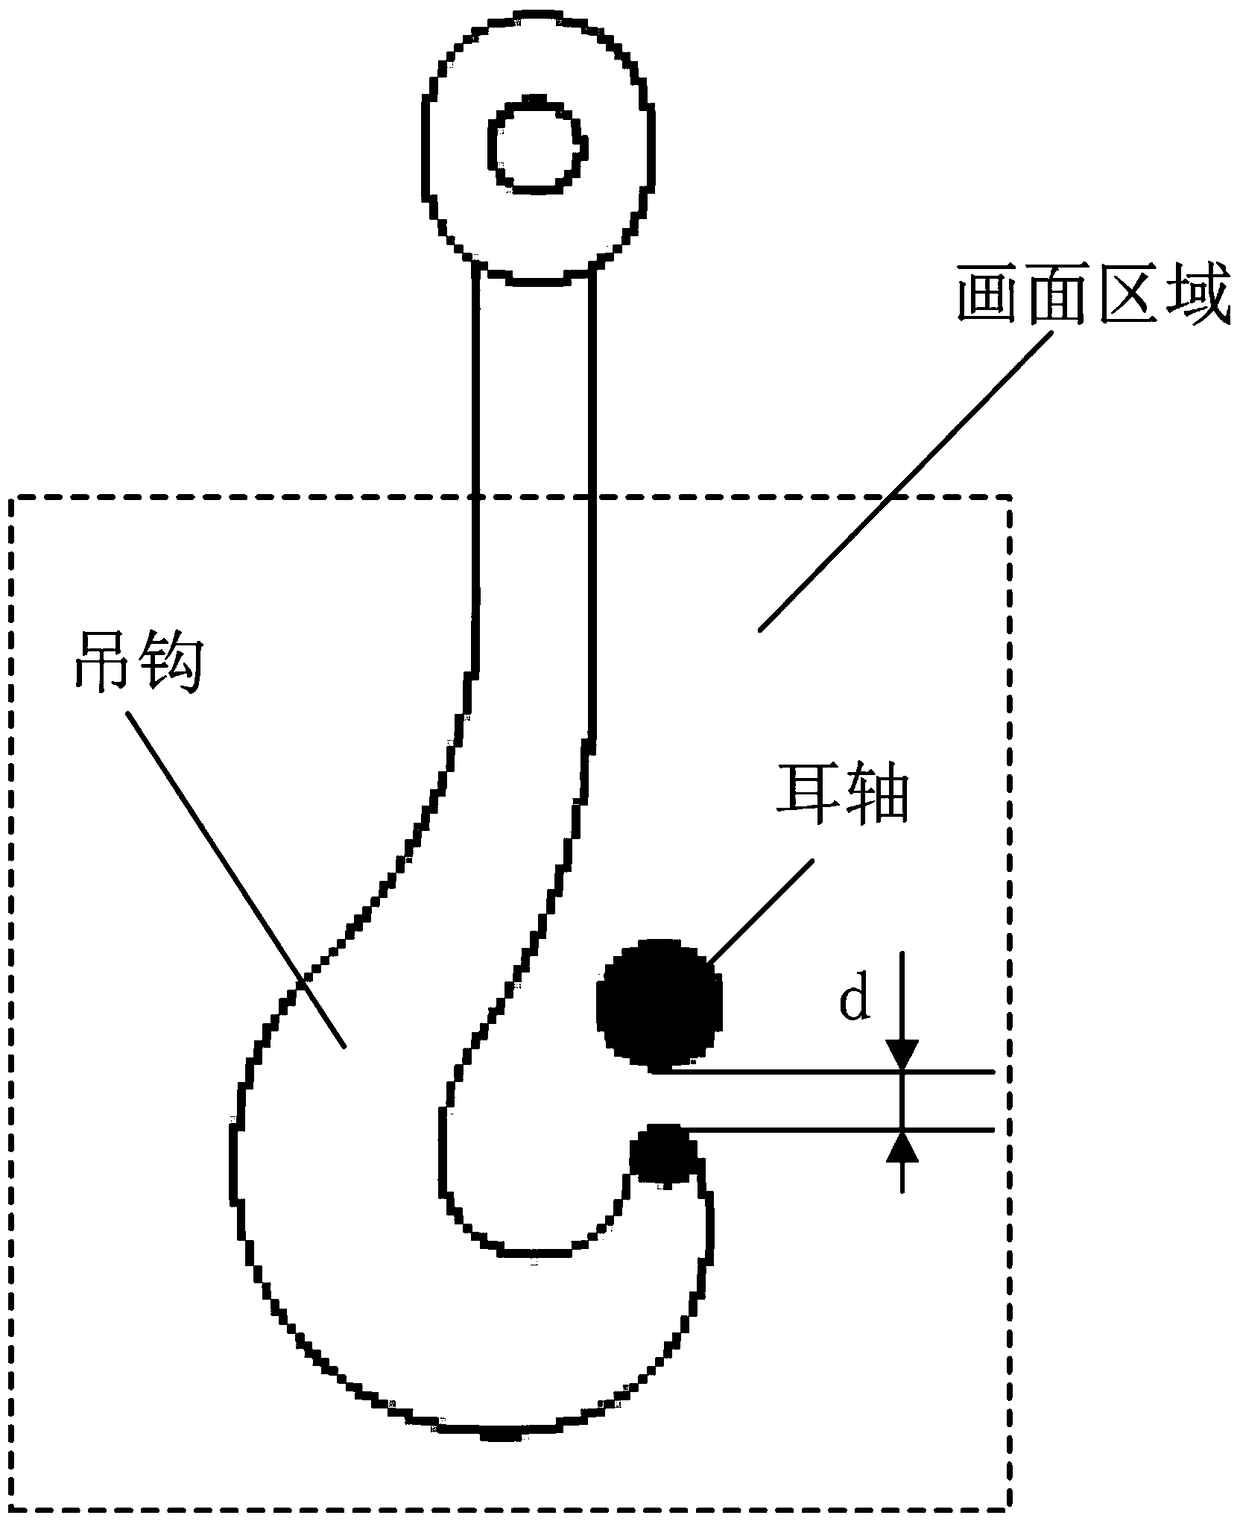 Steel ladle trunnion hoisting aligning recognition device and method